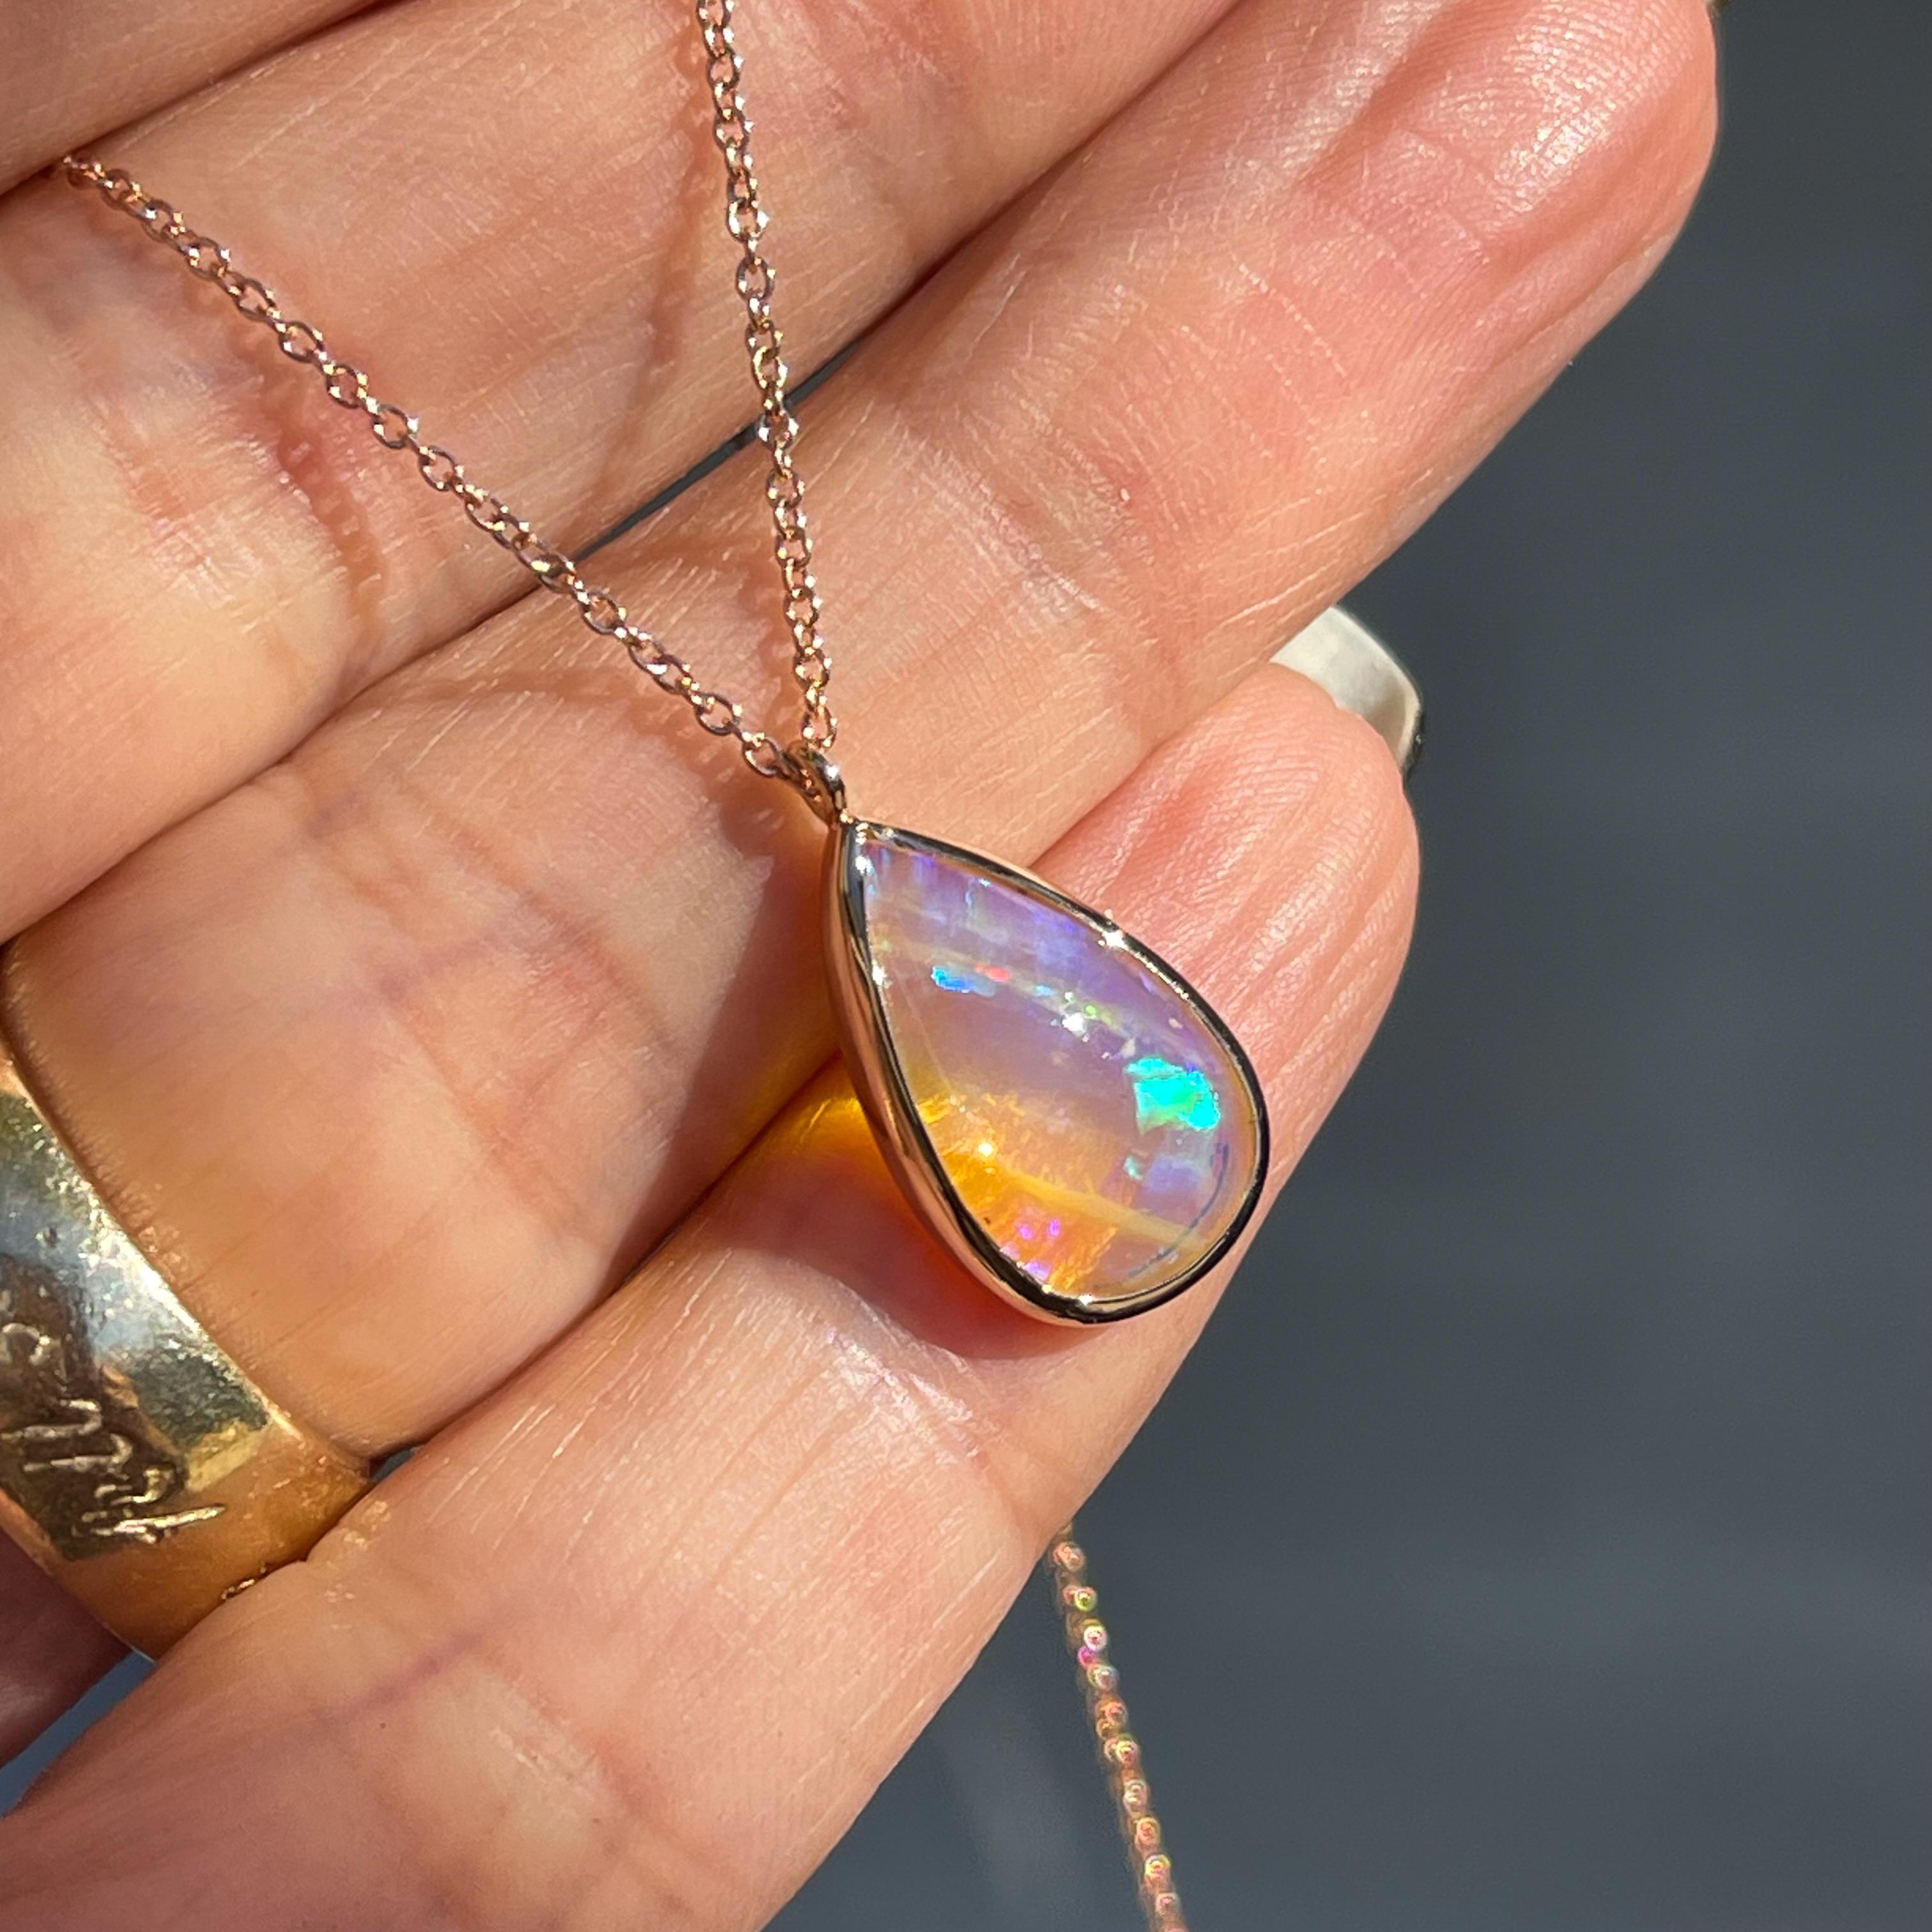 Contemporary Unicorn Tear Australian Opal Necklace No. 19 in 14k Rose Gold by NIXIN Jewelry For Sale